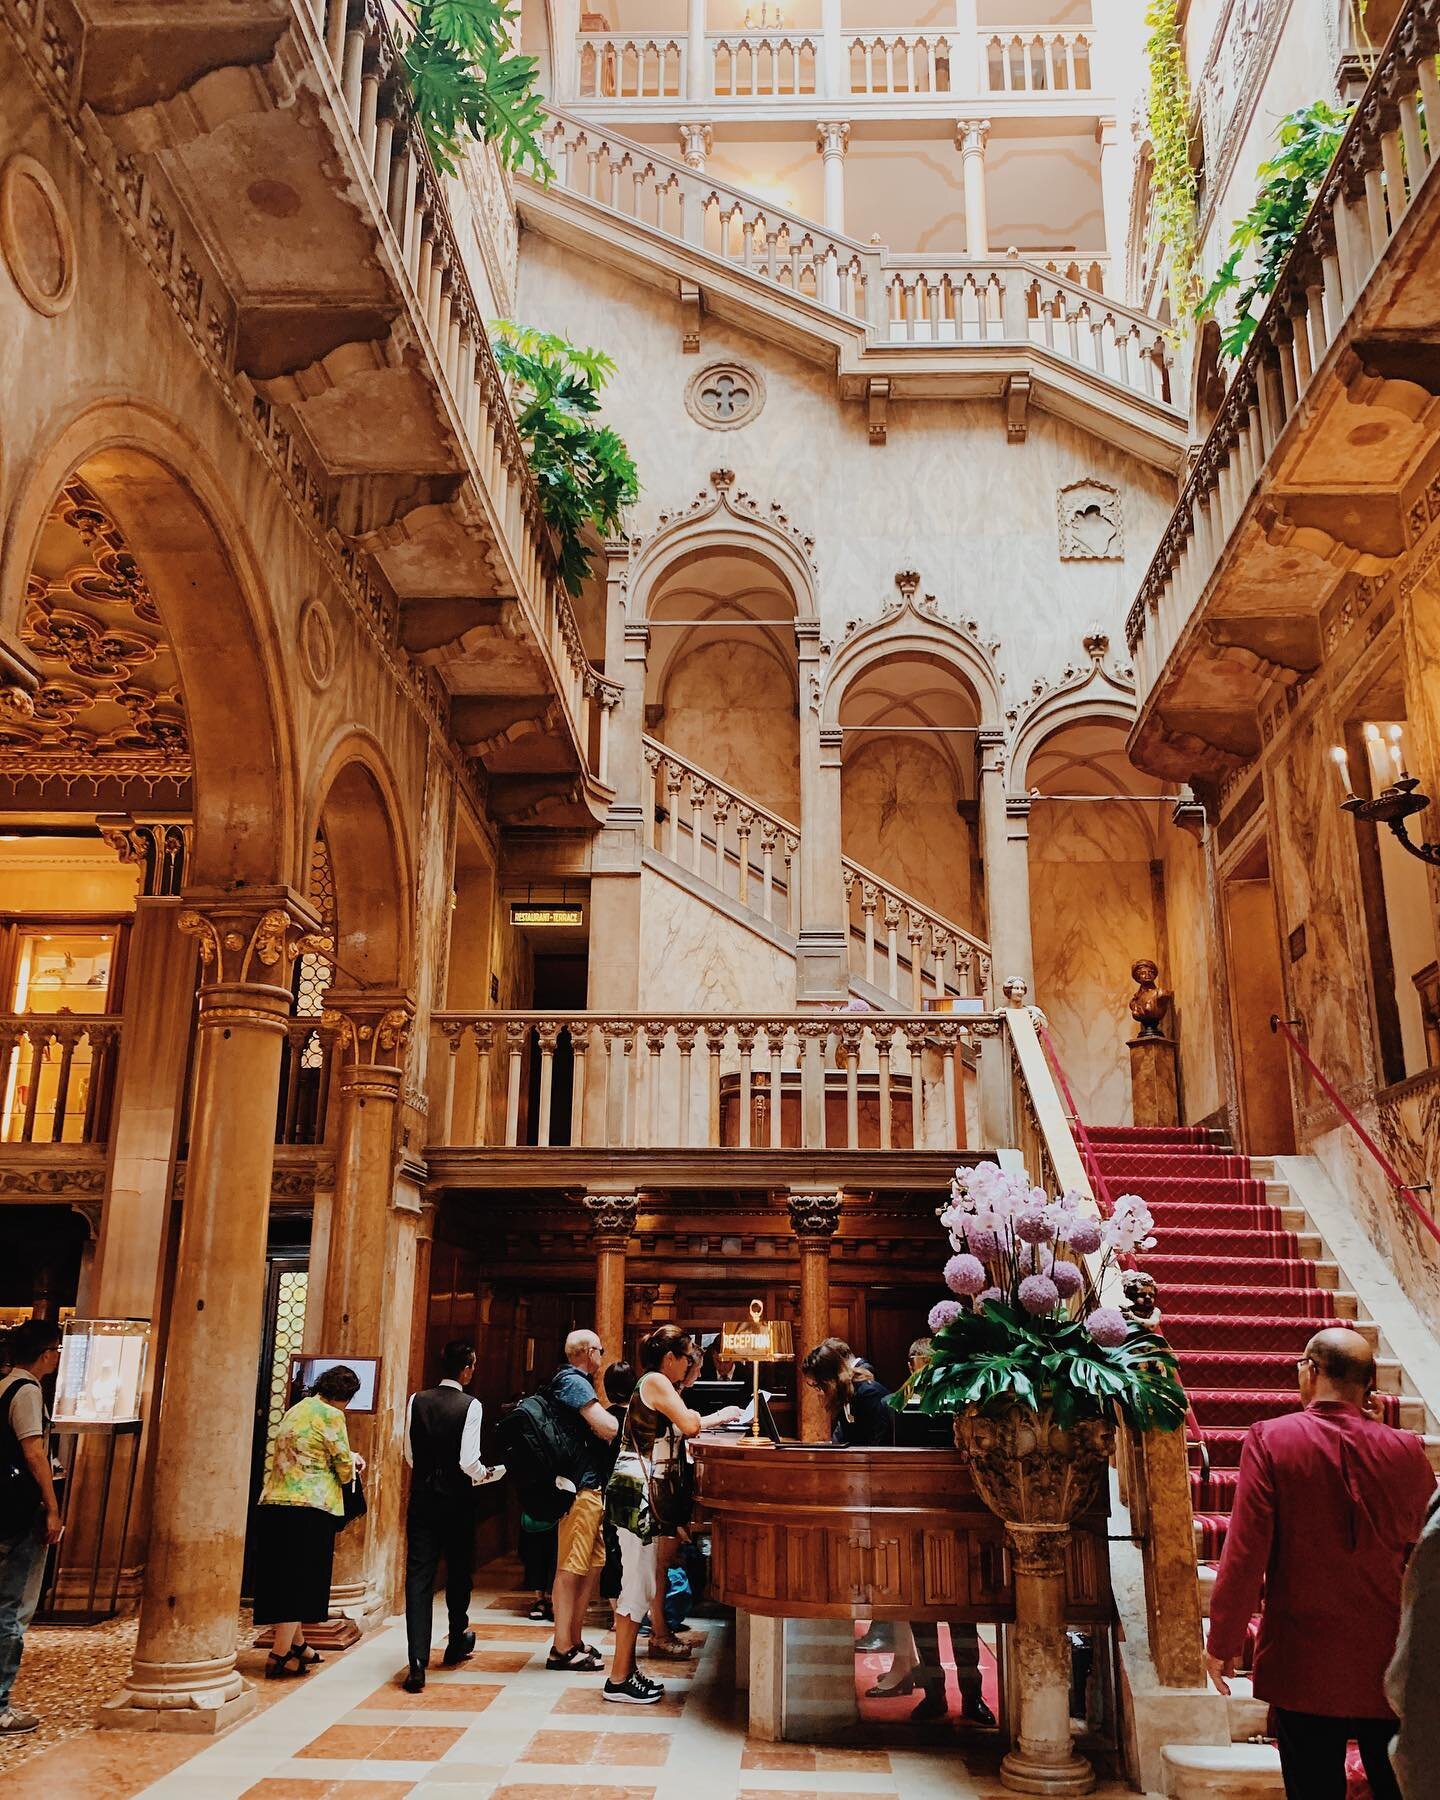 The Hotel Danieli was built at the end of the 14th century and you probably recognize it from the @johnnydepp and Angelina Jolie film, The Tourist. Raise your hand if you can&rsquo;t wait to be a tourist once again! 🙋&zwj;♀️ 
.
.
.
.
.
#travel #TLPi